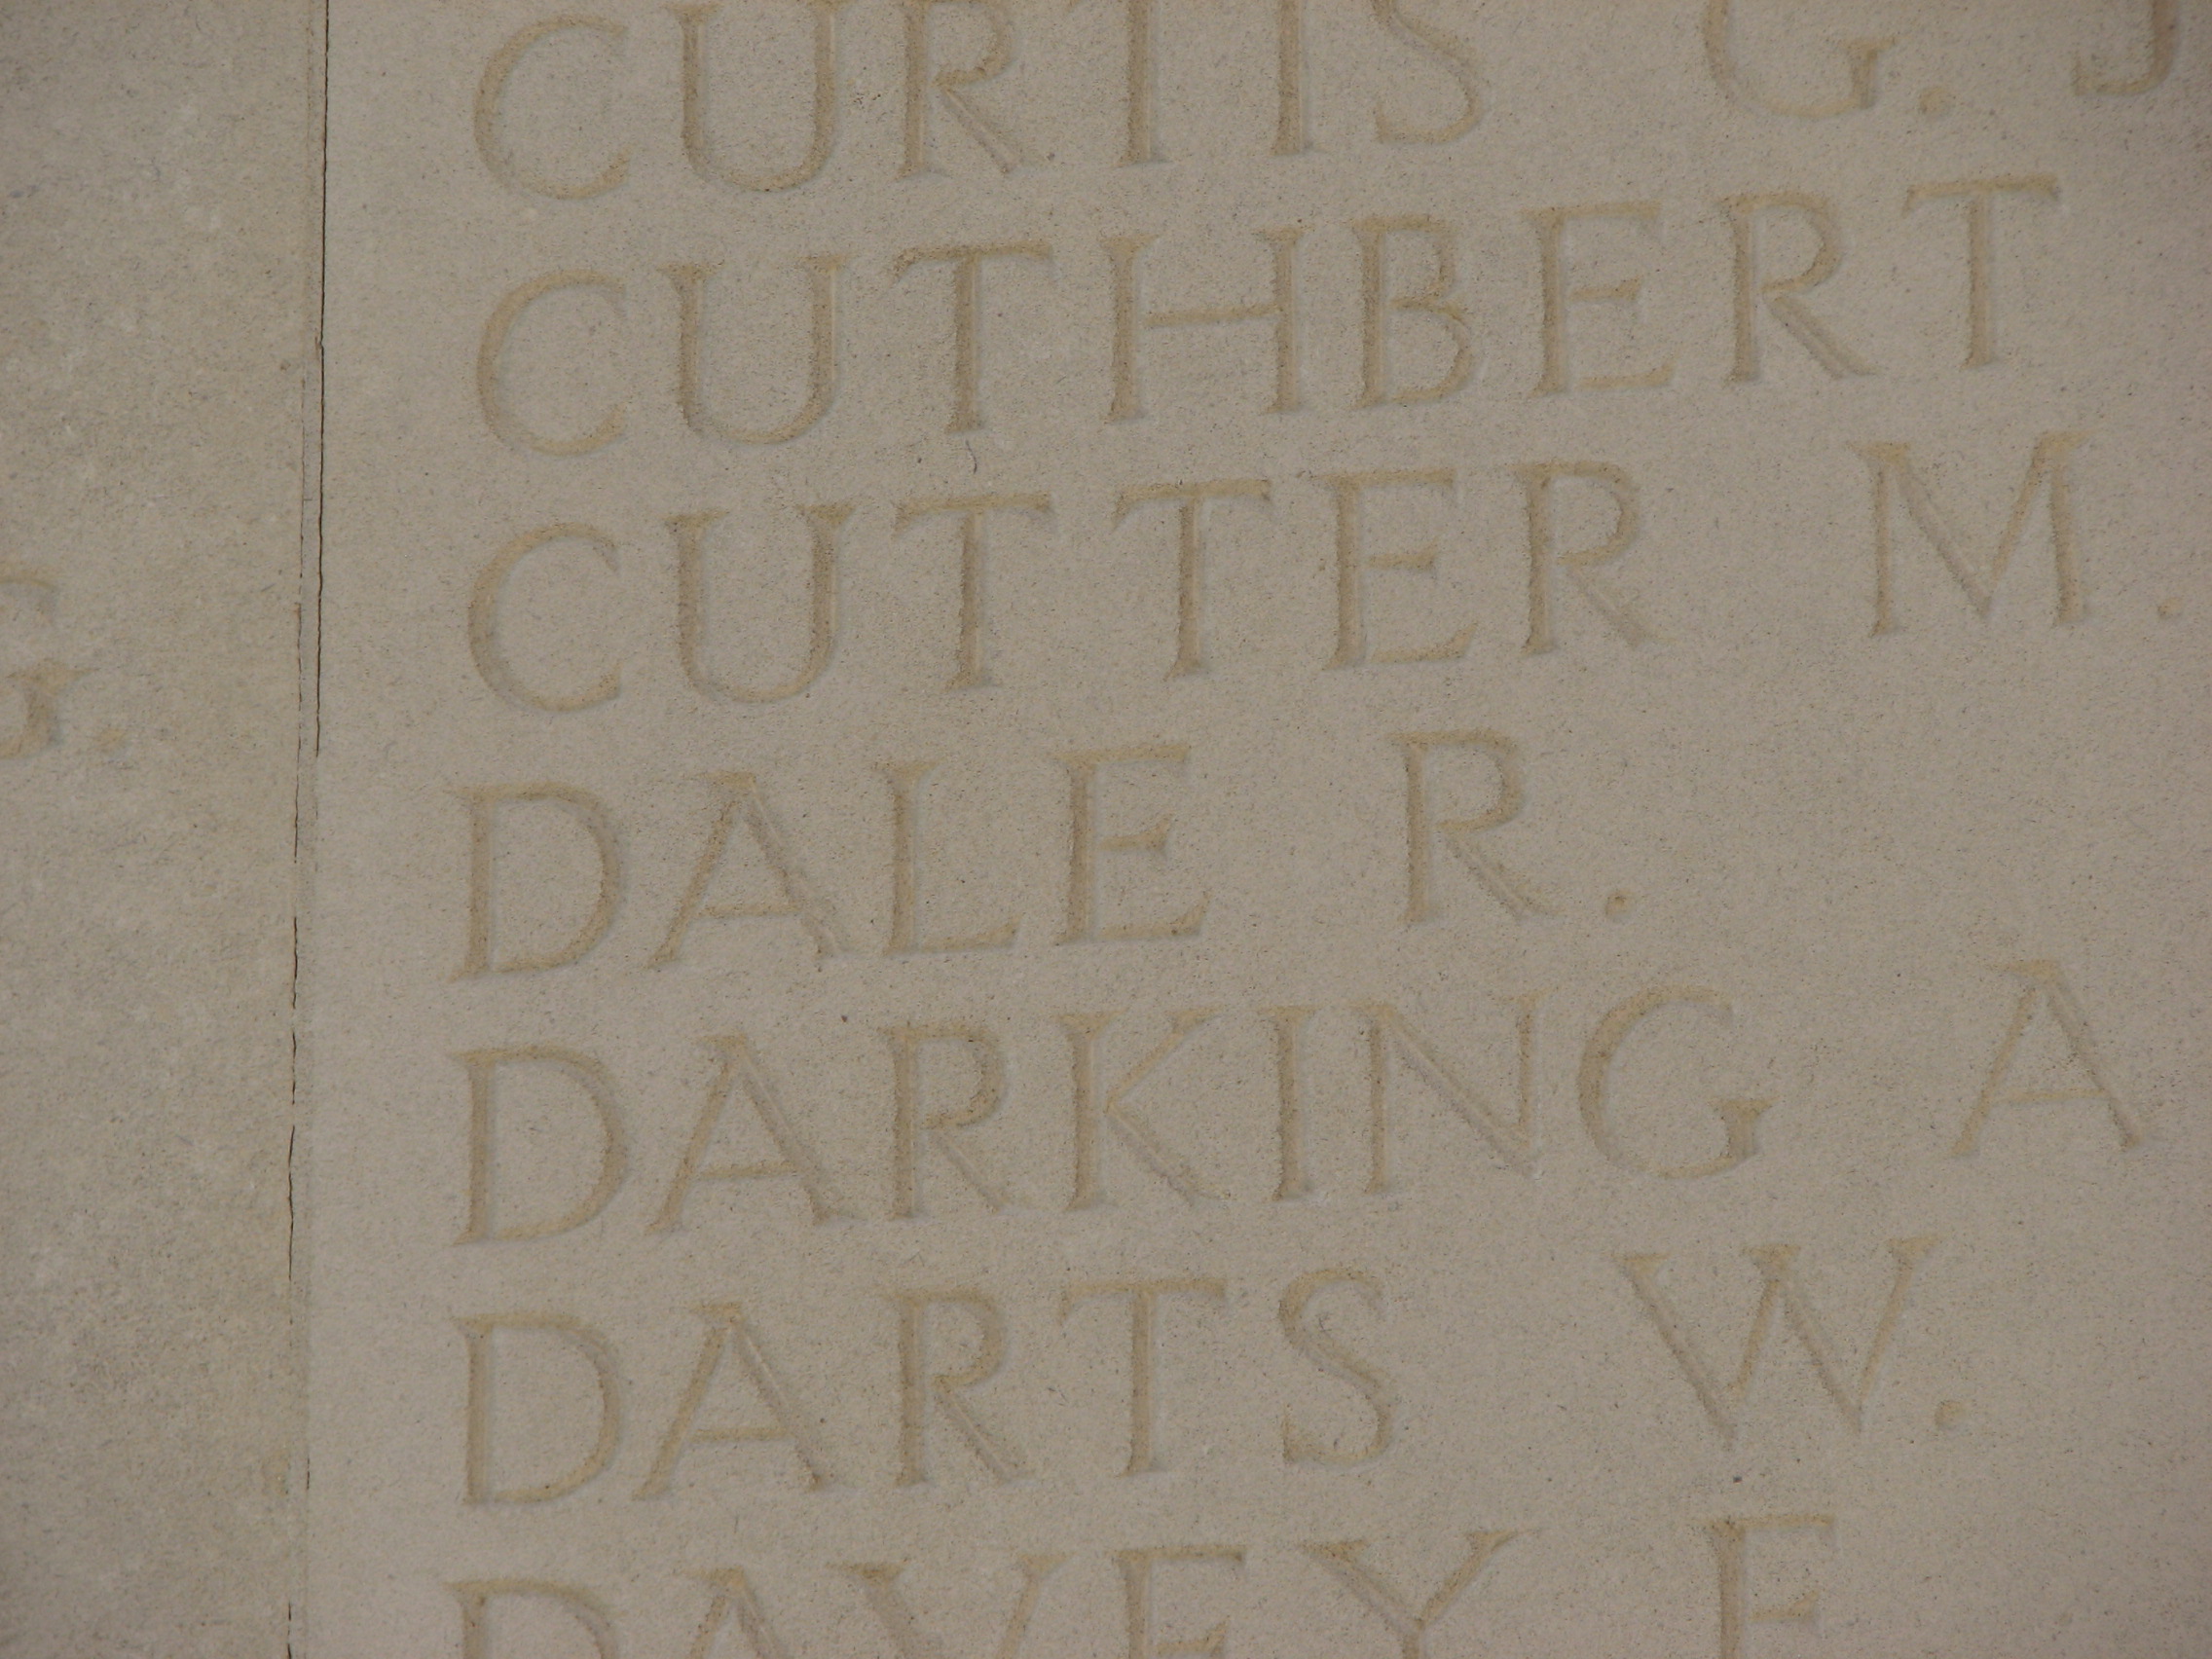 Robert's name inscribed on the Thiepval Memorial<br>MA